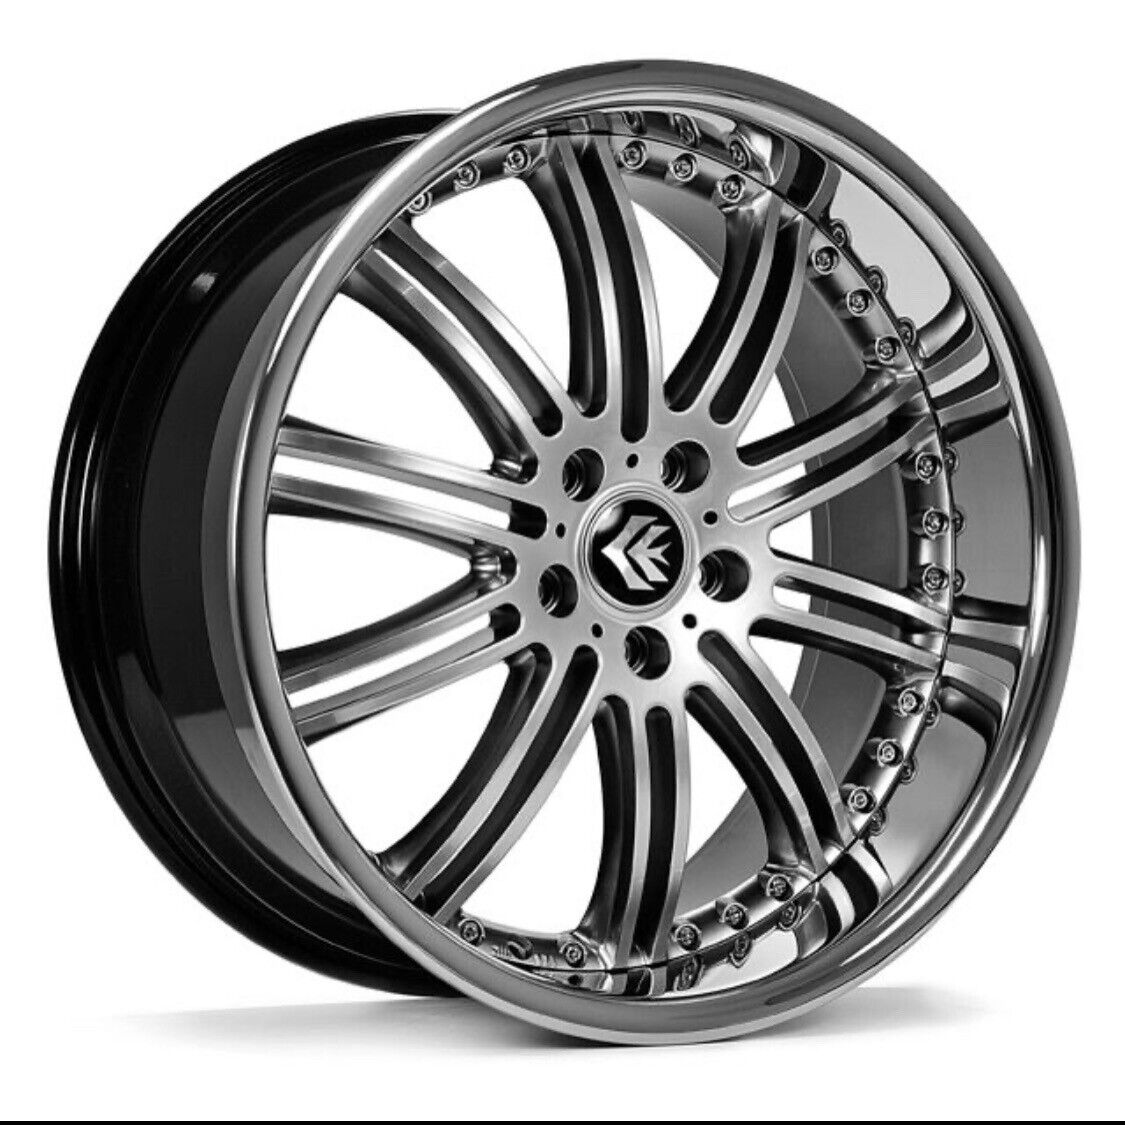 20” X8.5 20”x9.5 5 Lug 120 New Wheels Closeout Special 599.00 For The Set Of 4